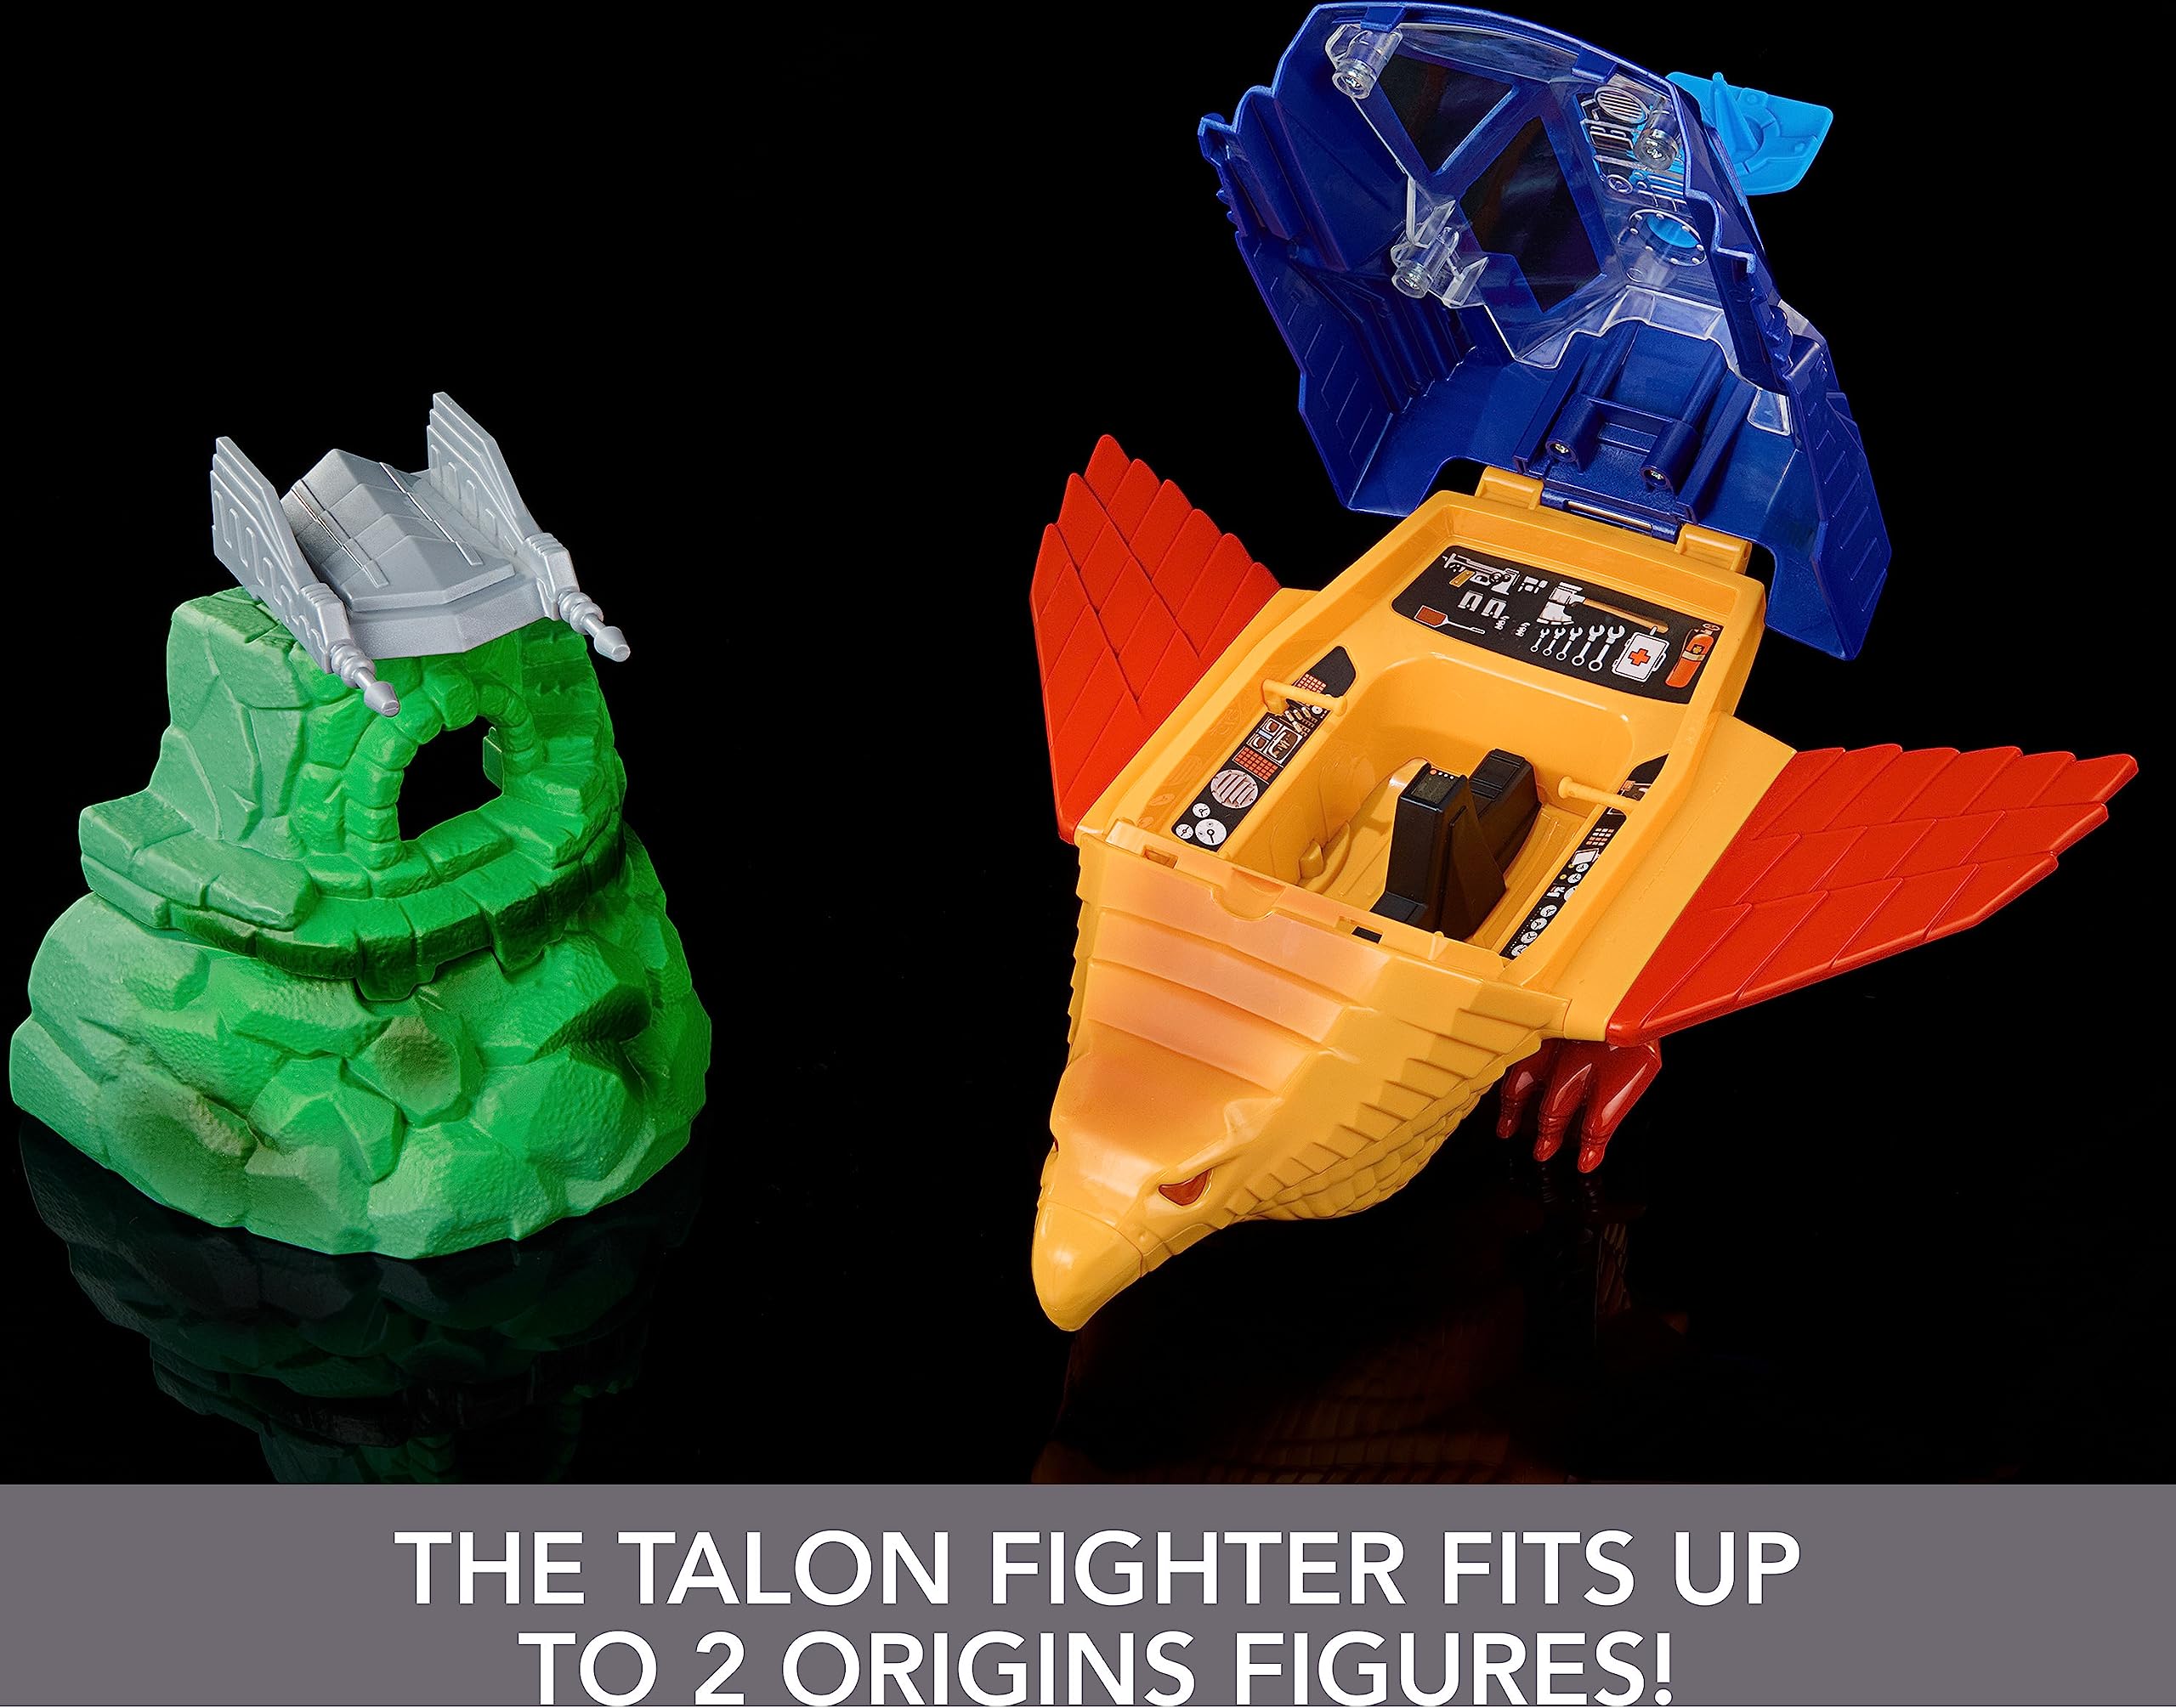 Masters of the Universe Origins Playset with Toy Plane & Accessories, Talon Fighter & Point Dread Outpost, 5.5-in Scale